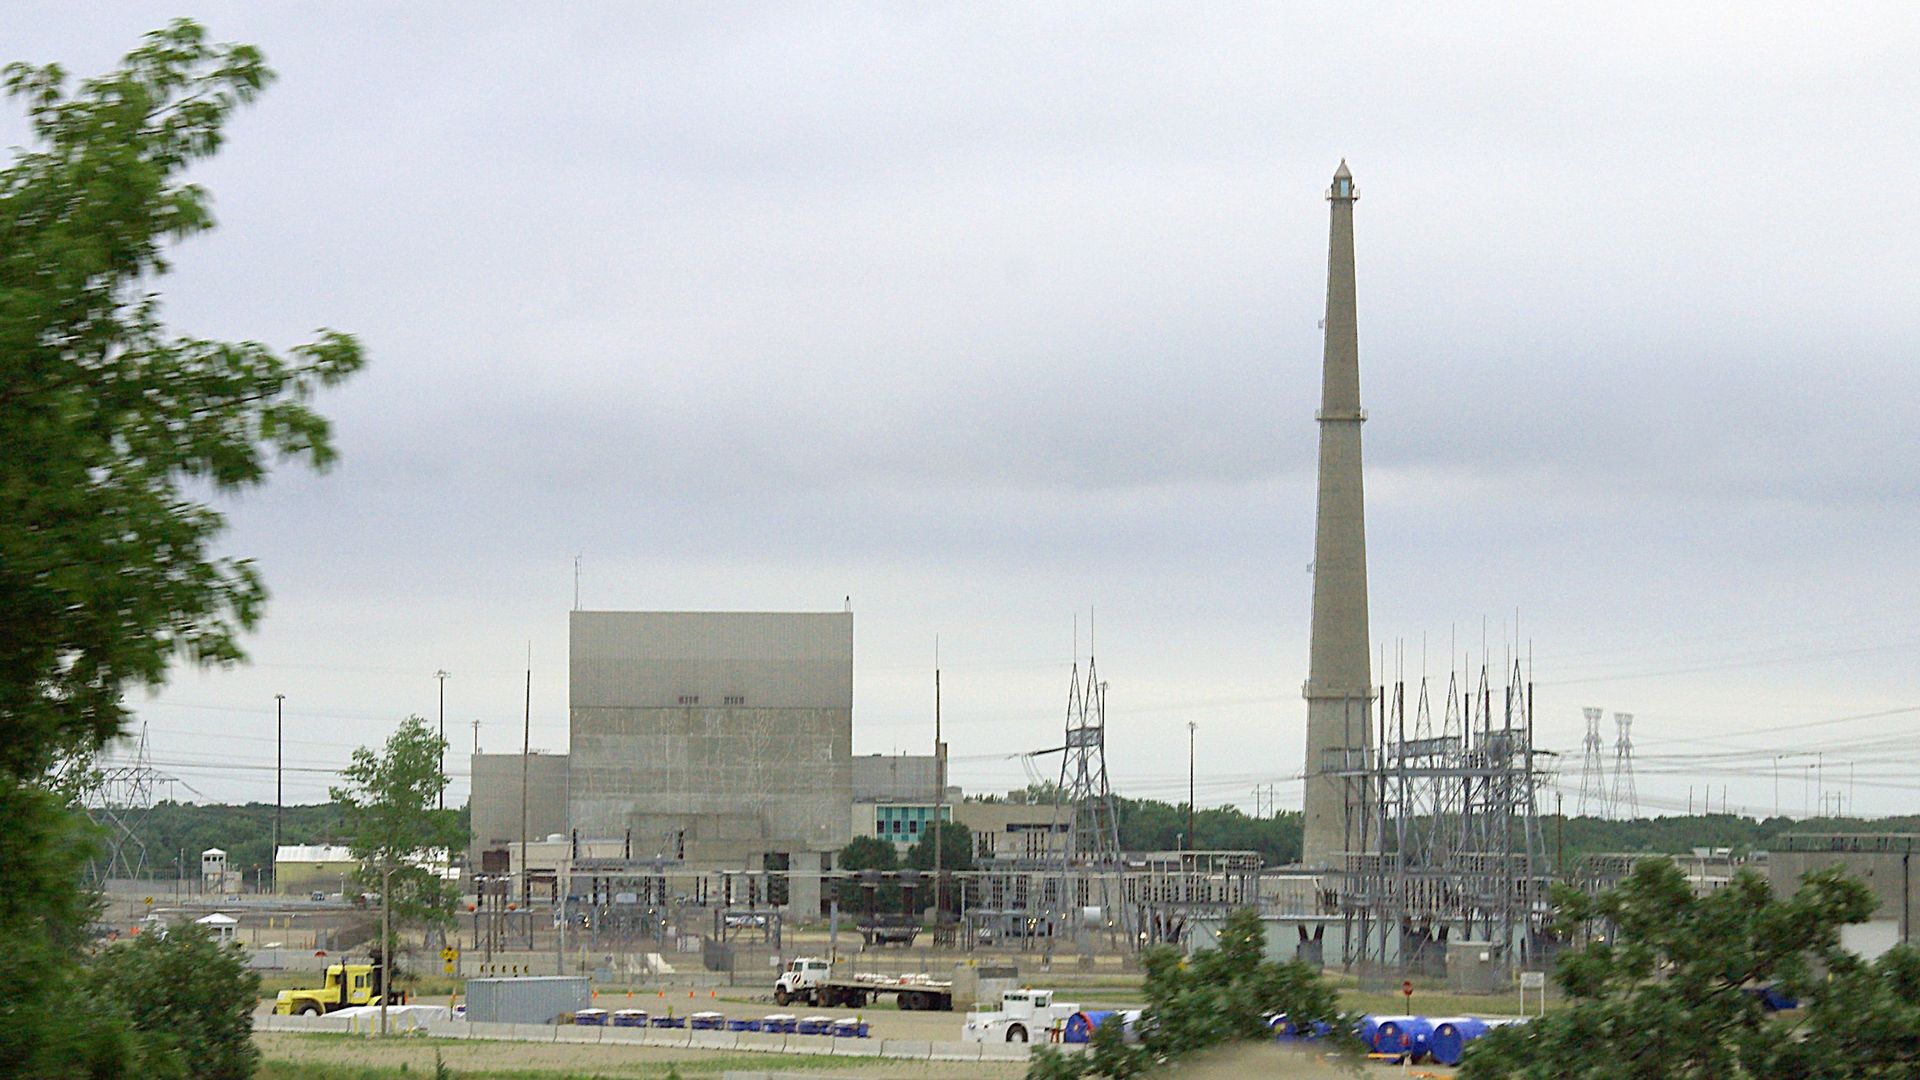 A grayish brown building and large column of a nuclear power plant in Minnesota